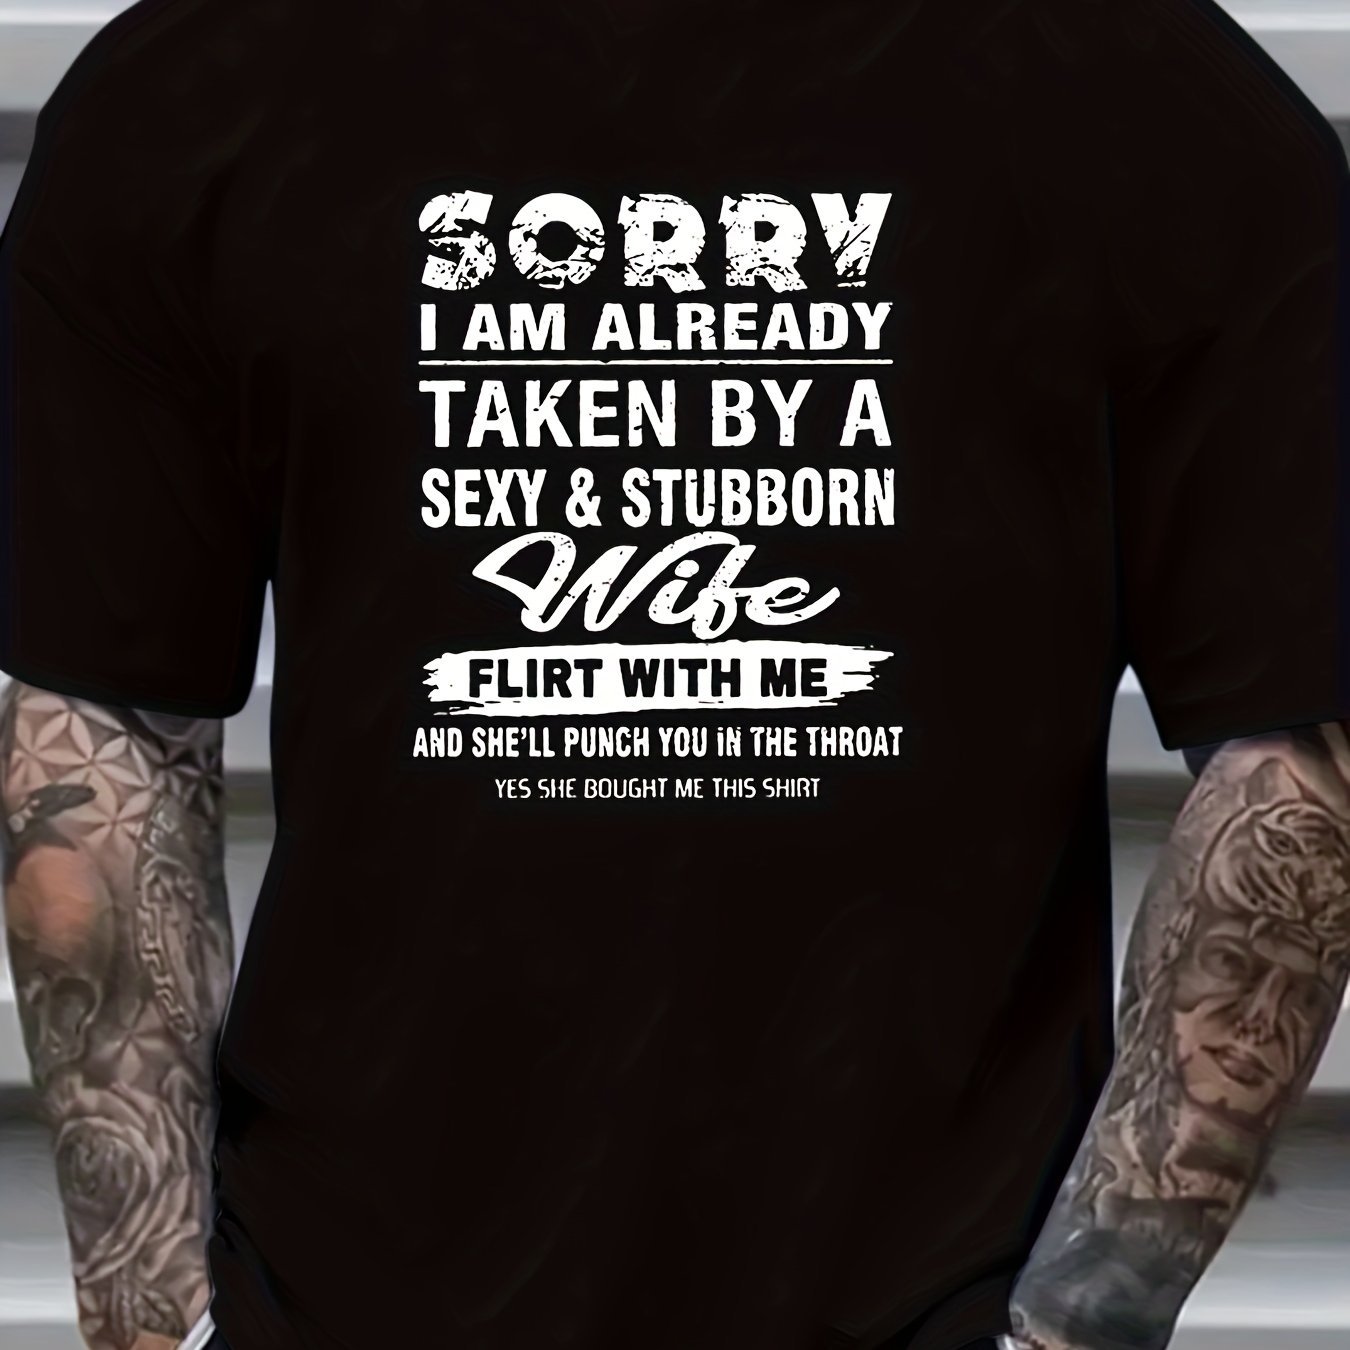 

I Am Already By A Sexy & Stubborn Wife Letter Print Men's Casual Short Sleeve T-shirt, Breathable Summer Tee, Cotton Blend, Crew Neck Top